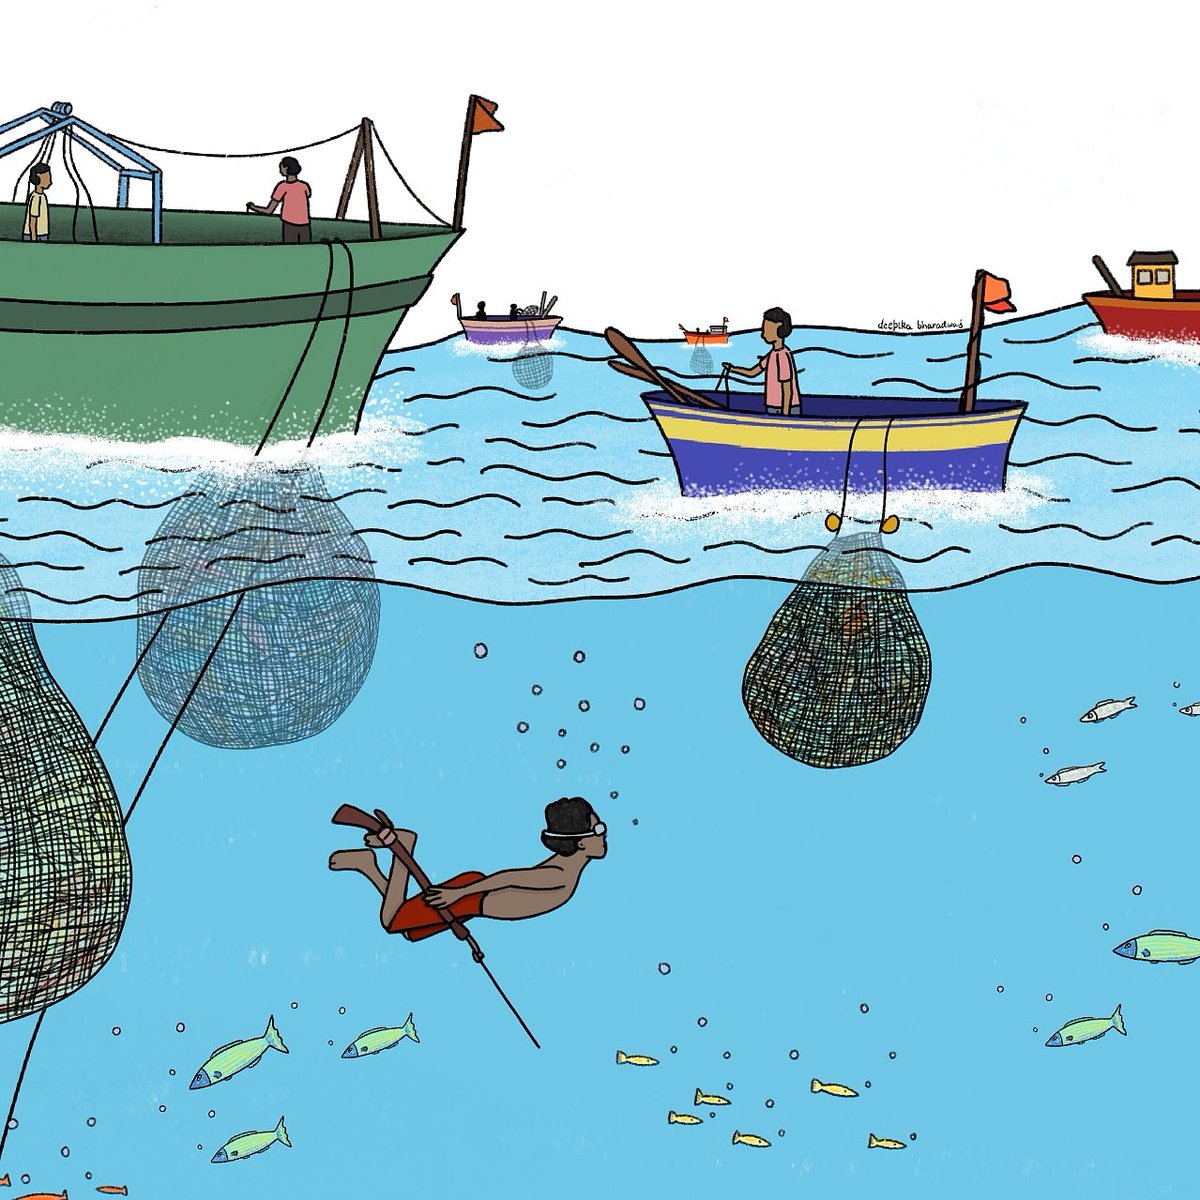  #BottomTrawlers operating in  #India are fishing largely for prawns, a high-value export product. The practice uses a very fine net that sweeps across the ocean floor, catching not just prawns that live on the bottom of the sea but also all the other forms of marine life. Read on.